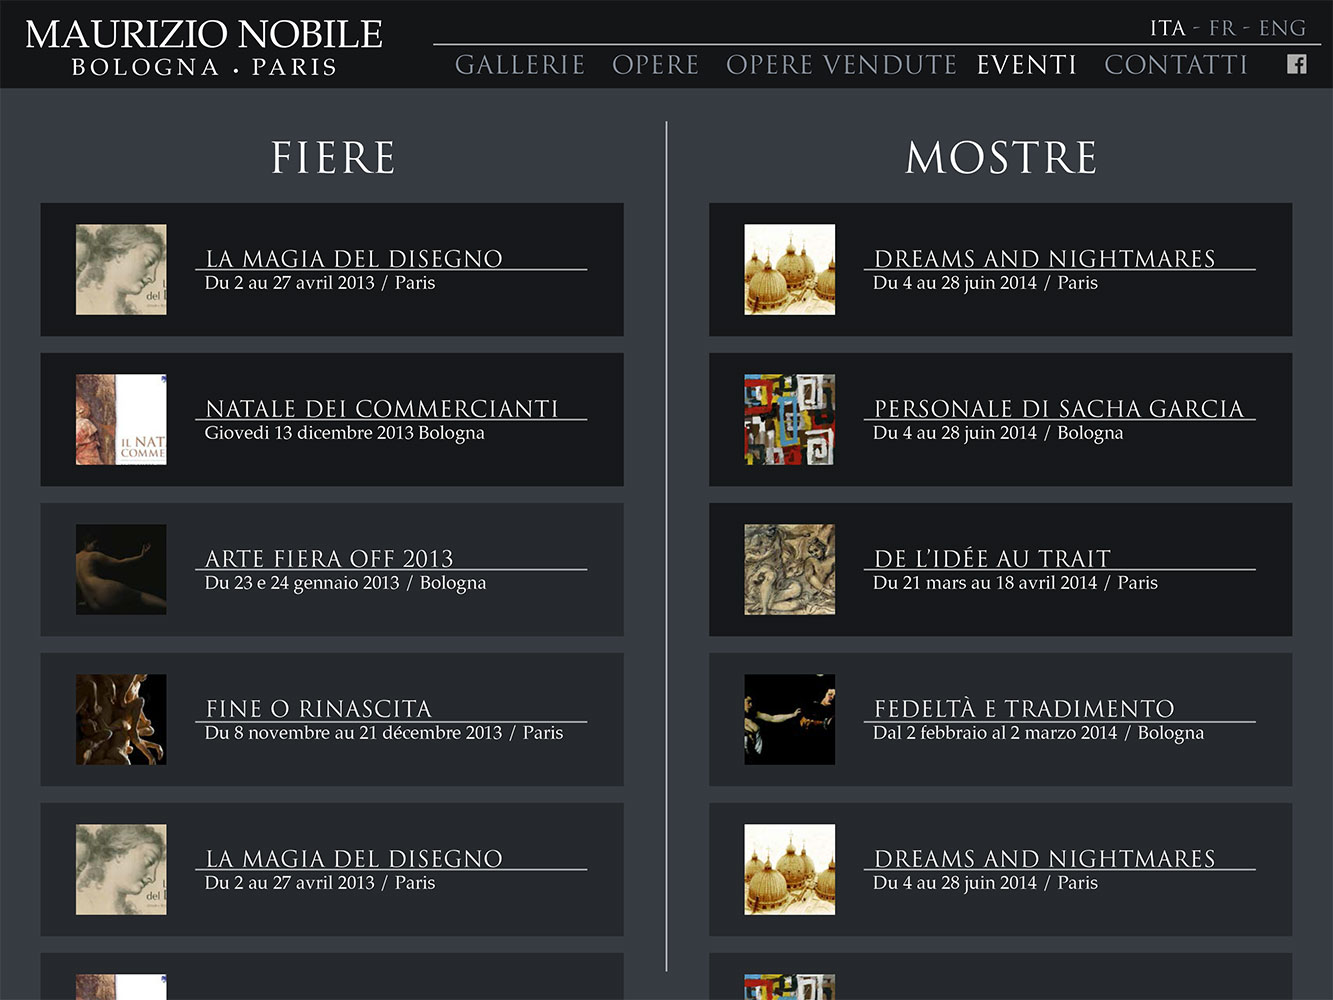 UI design of the Events page for M. Nobile